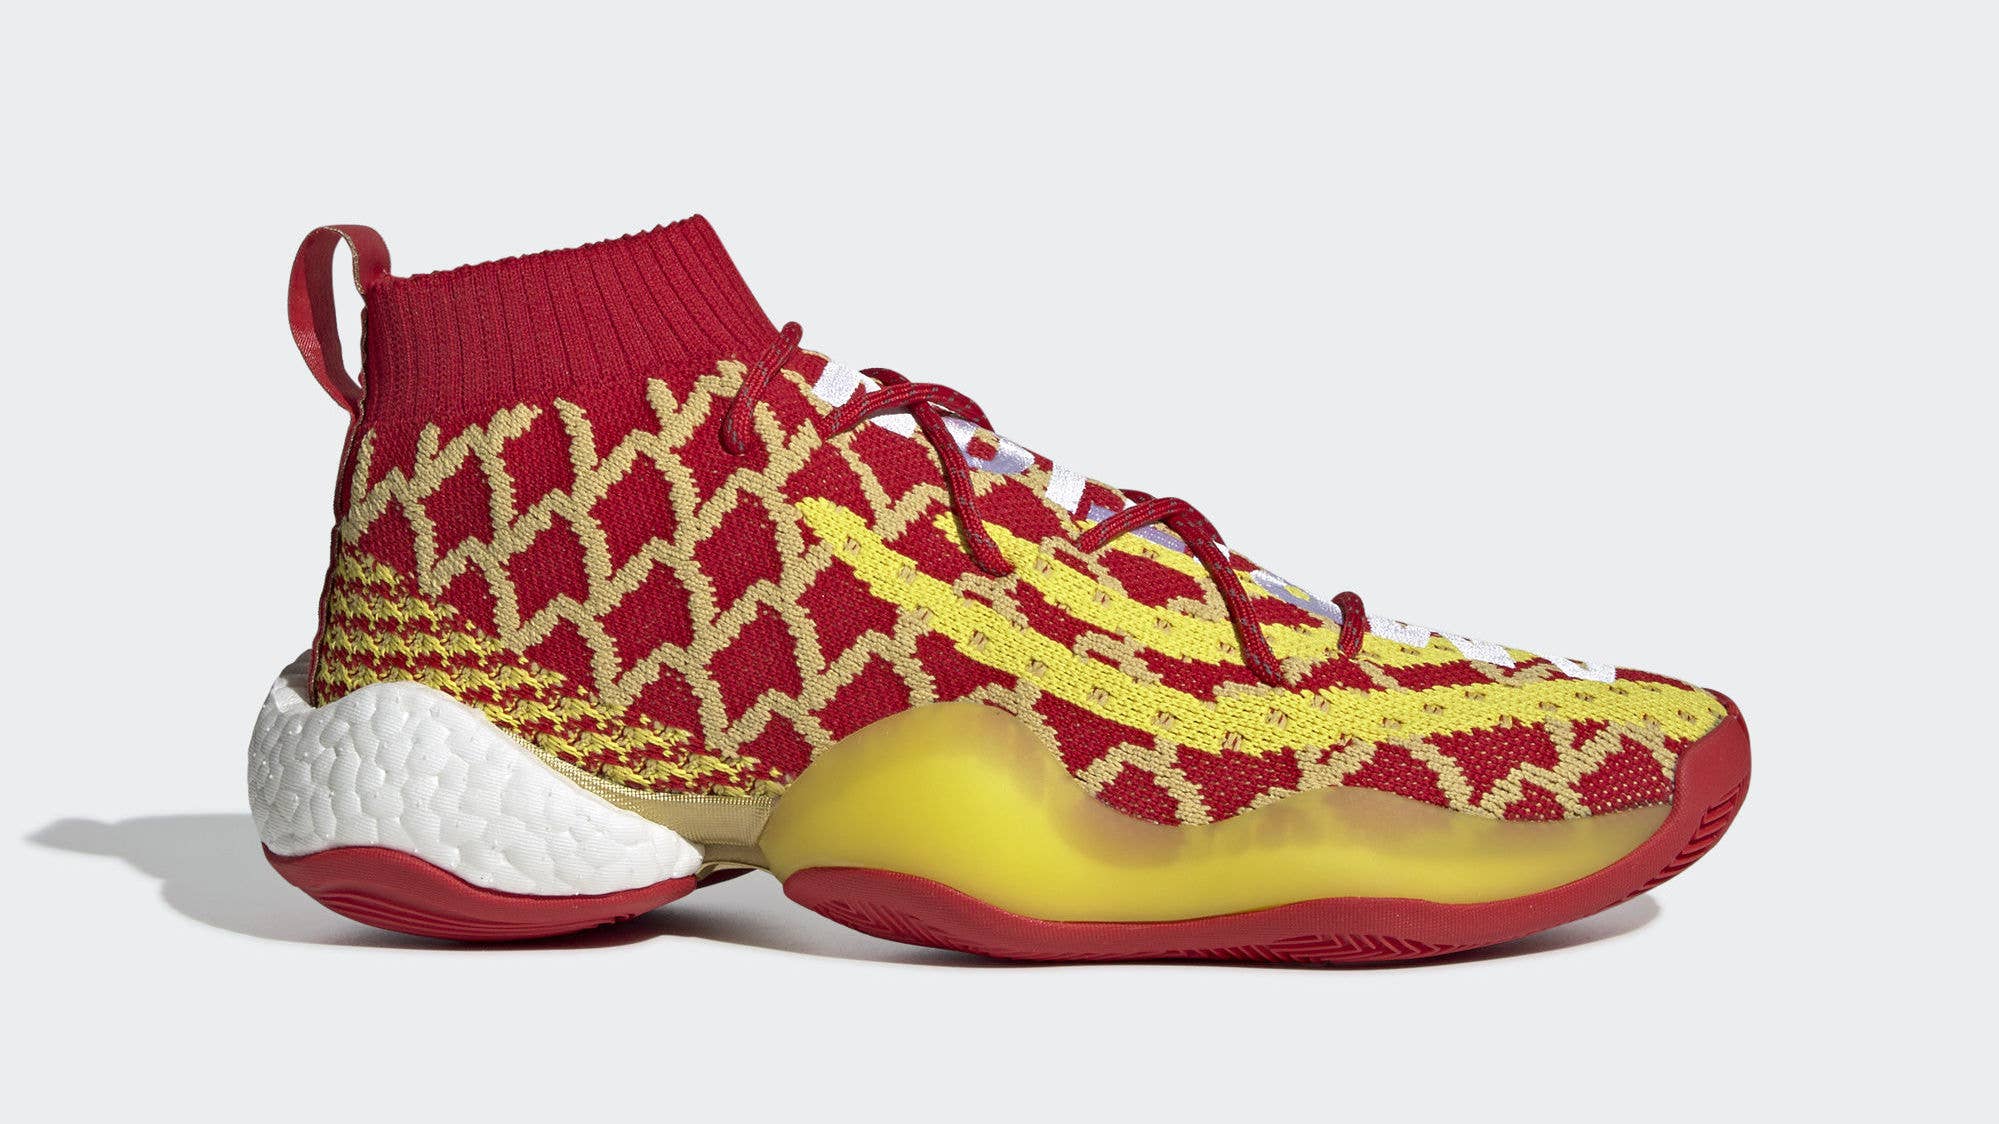 Pharrell x Adidas Crazy BYW 'Chinese New Year' EE8688 (Lateral)